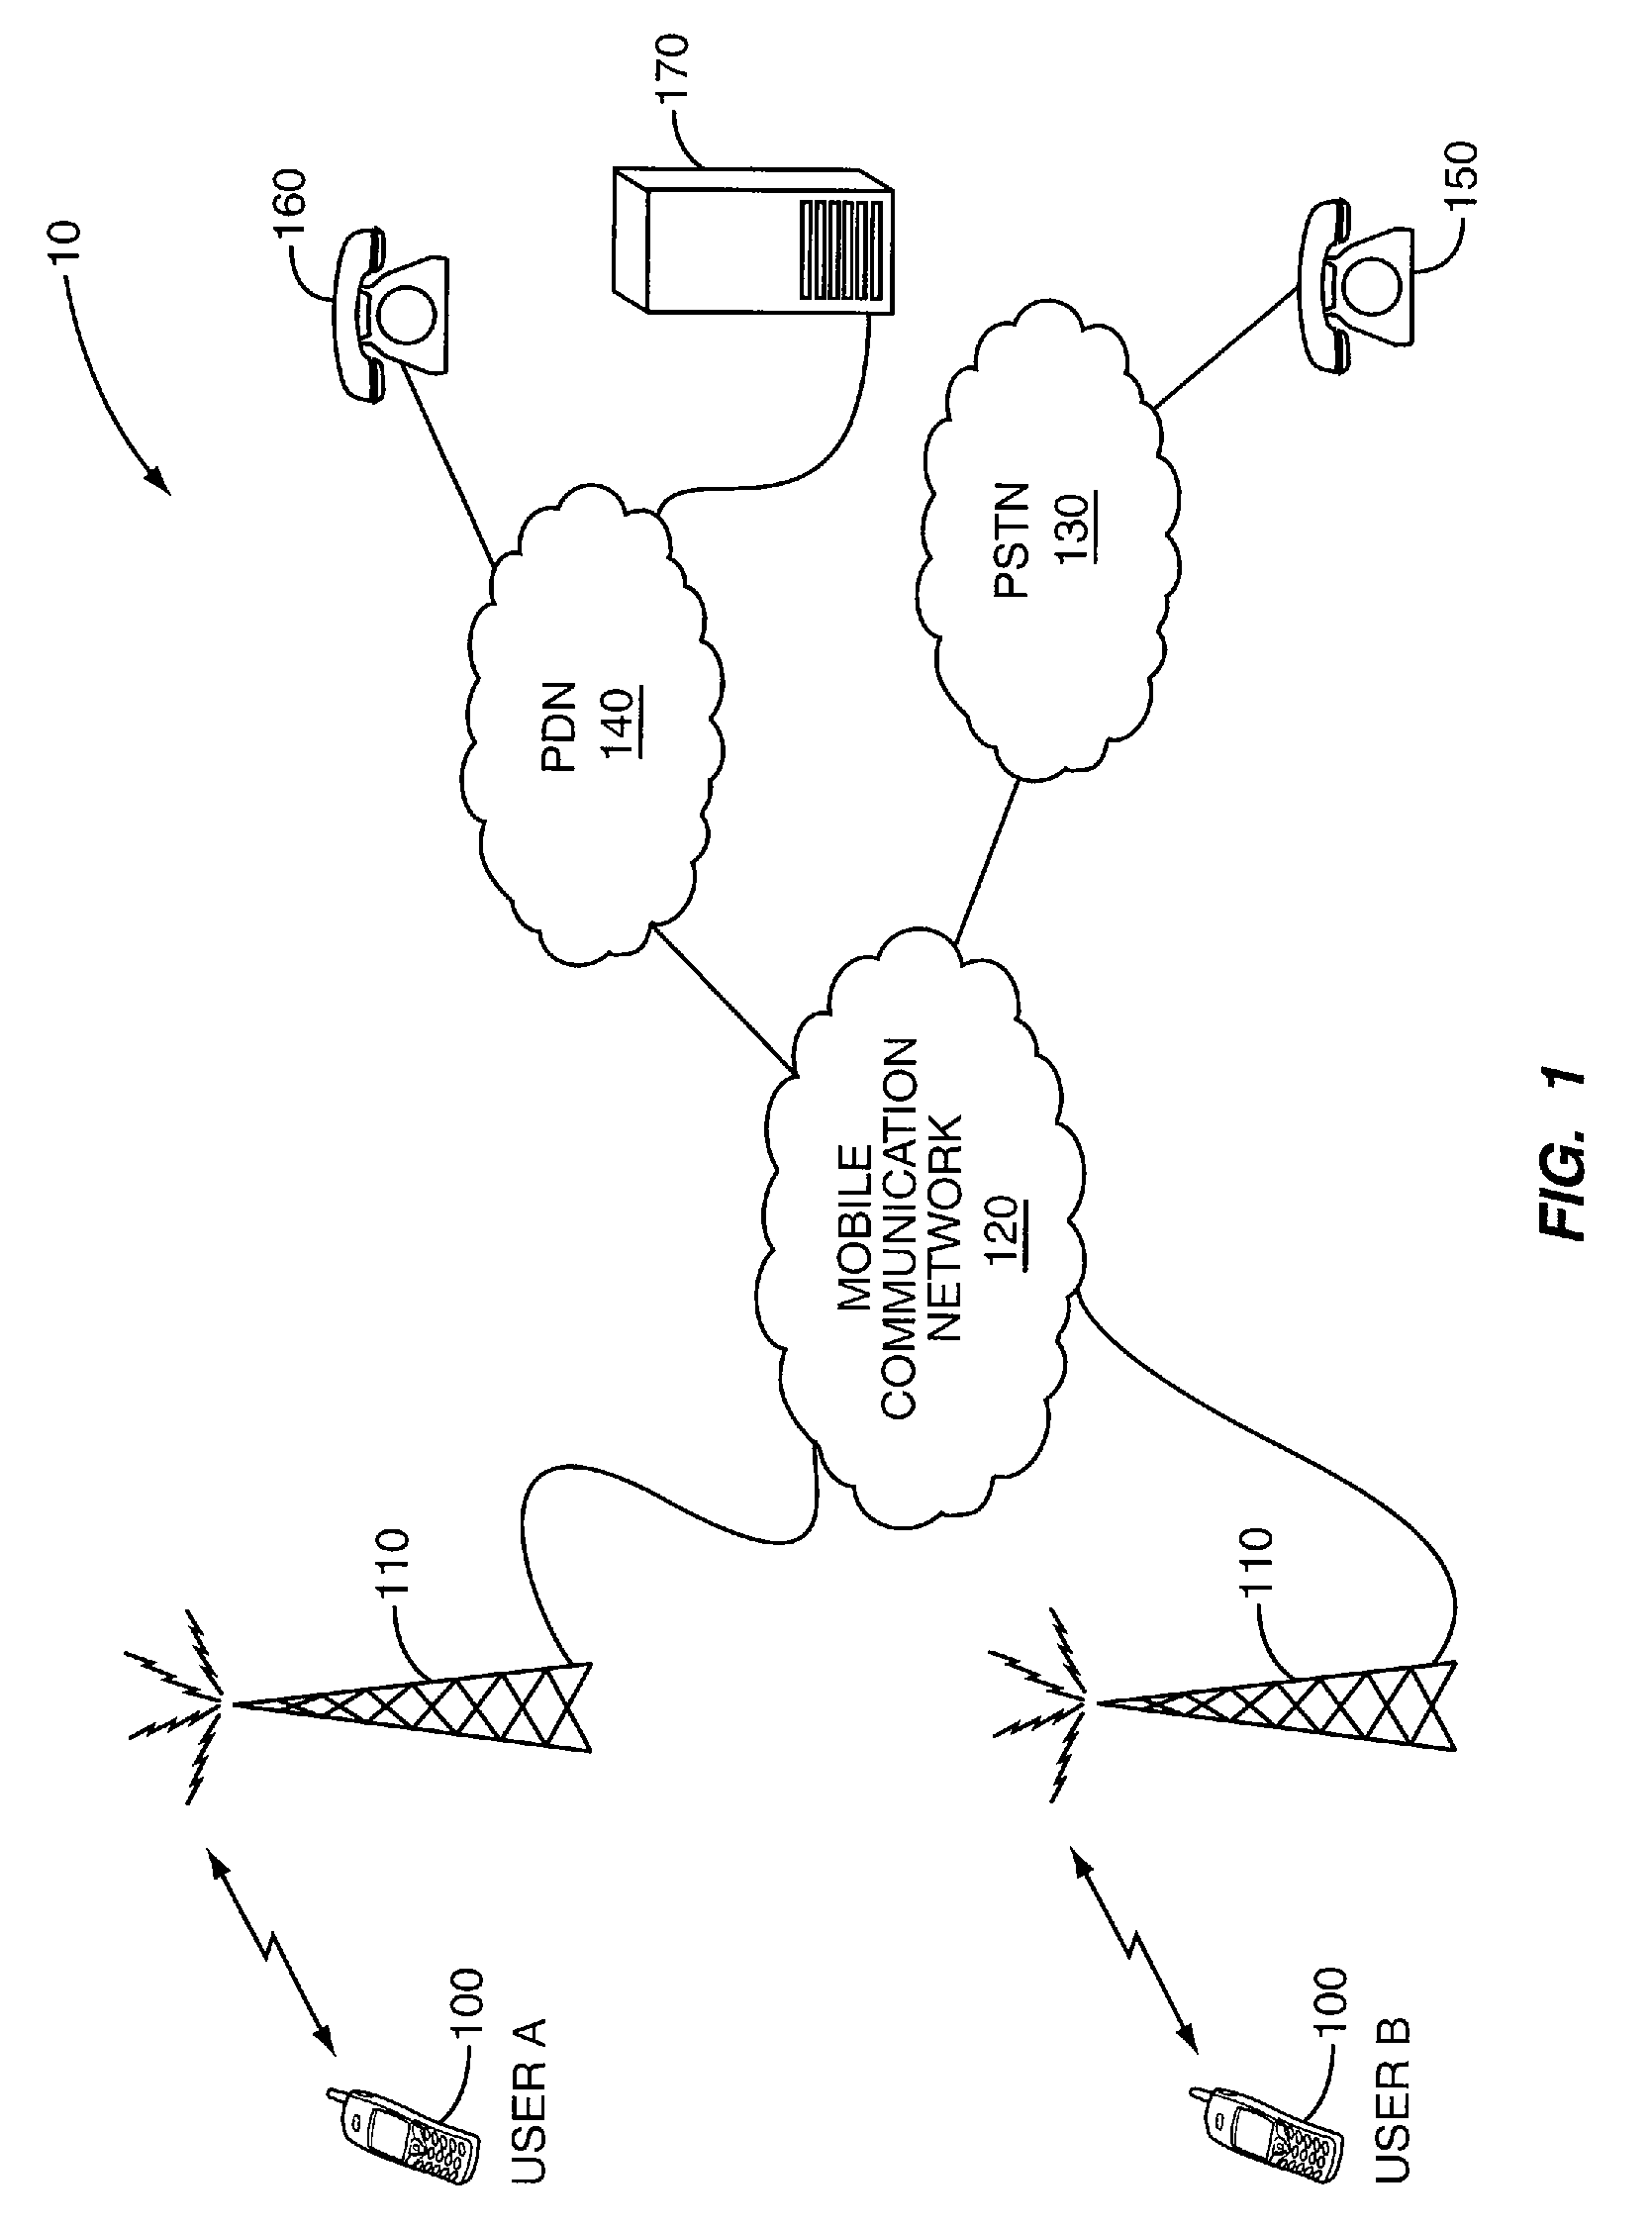 System, Method, and Device for Playing Music During Conversation Suspension